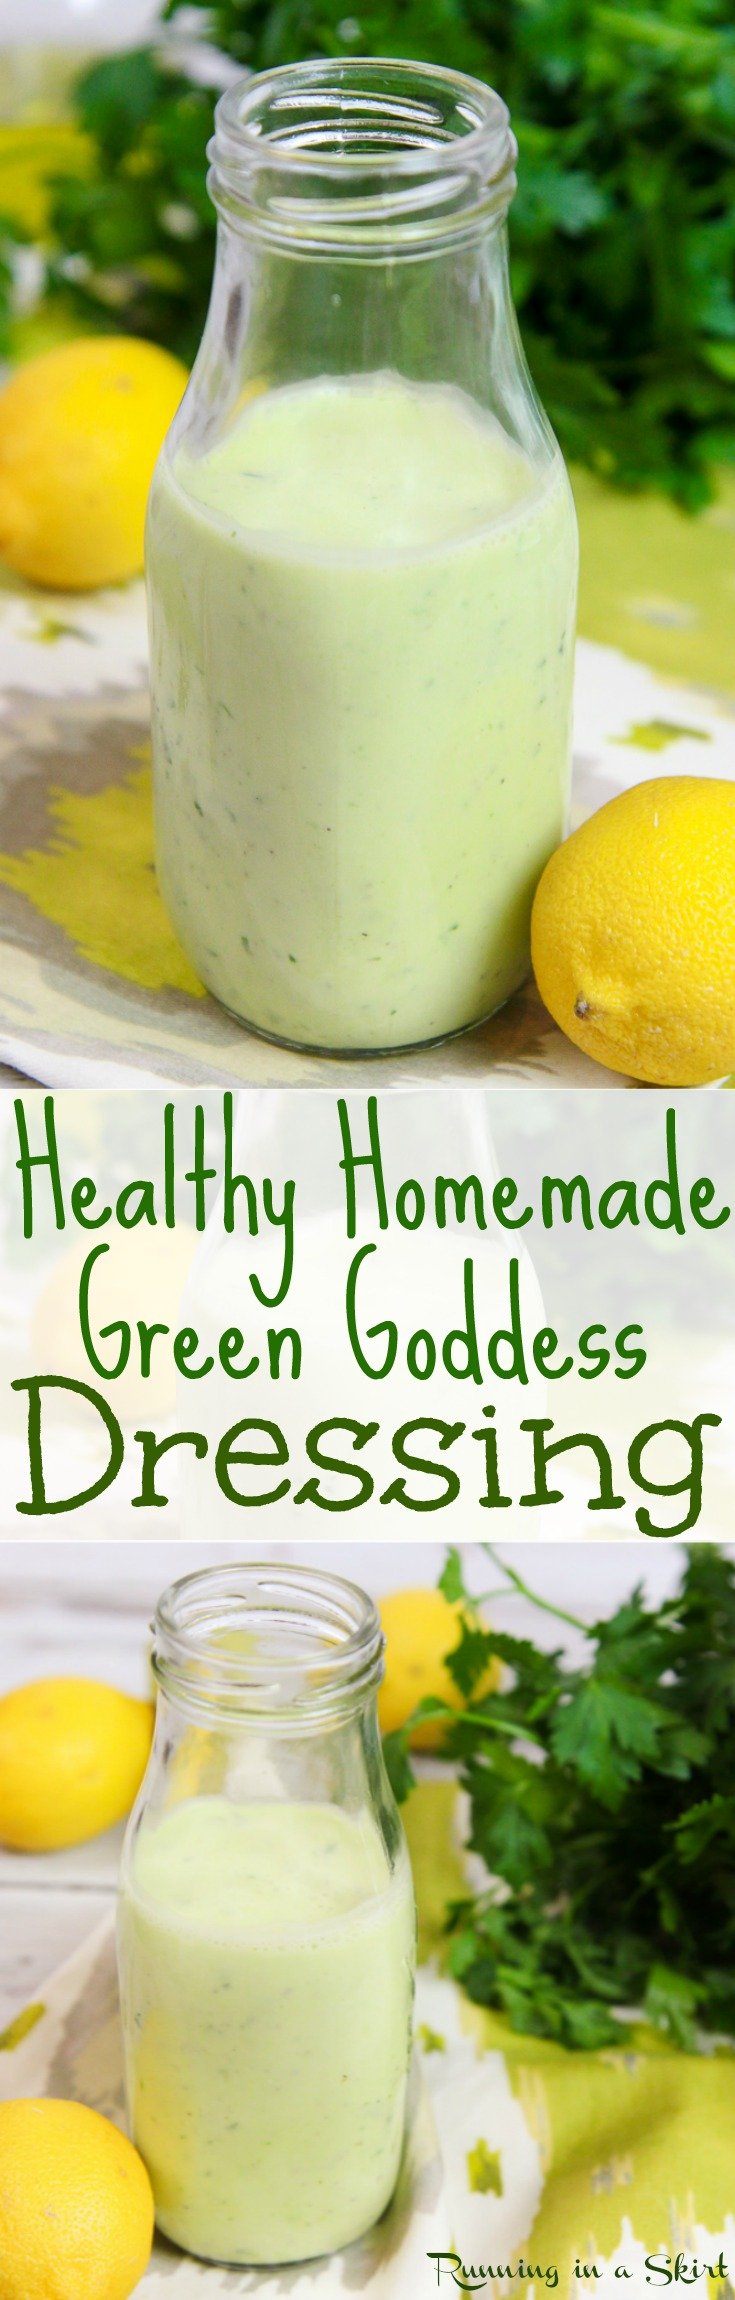 Healthy Homemade Green Goddess Dressing recipe. An easy, classic and creamy salad dressing with greek yogurt and fresh herbs. A clean eating, low carb and light version! / Running in a Skirt via @juliewunder